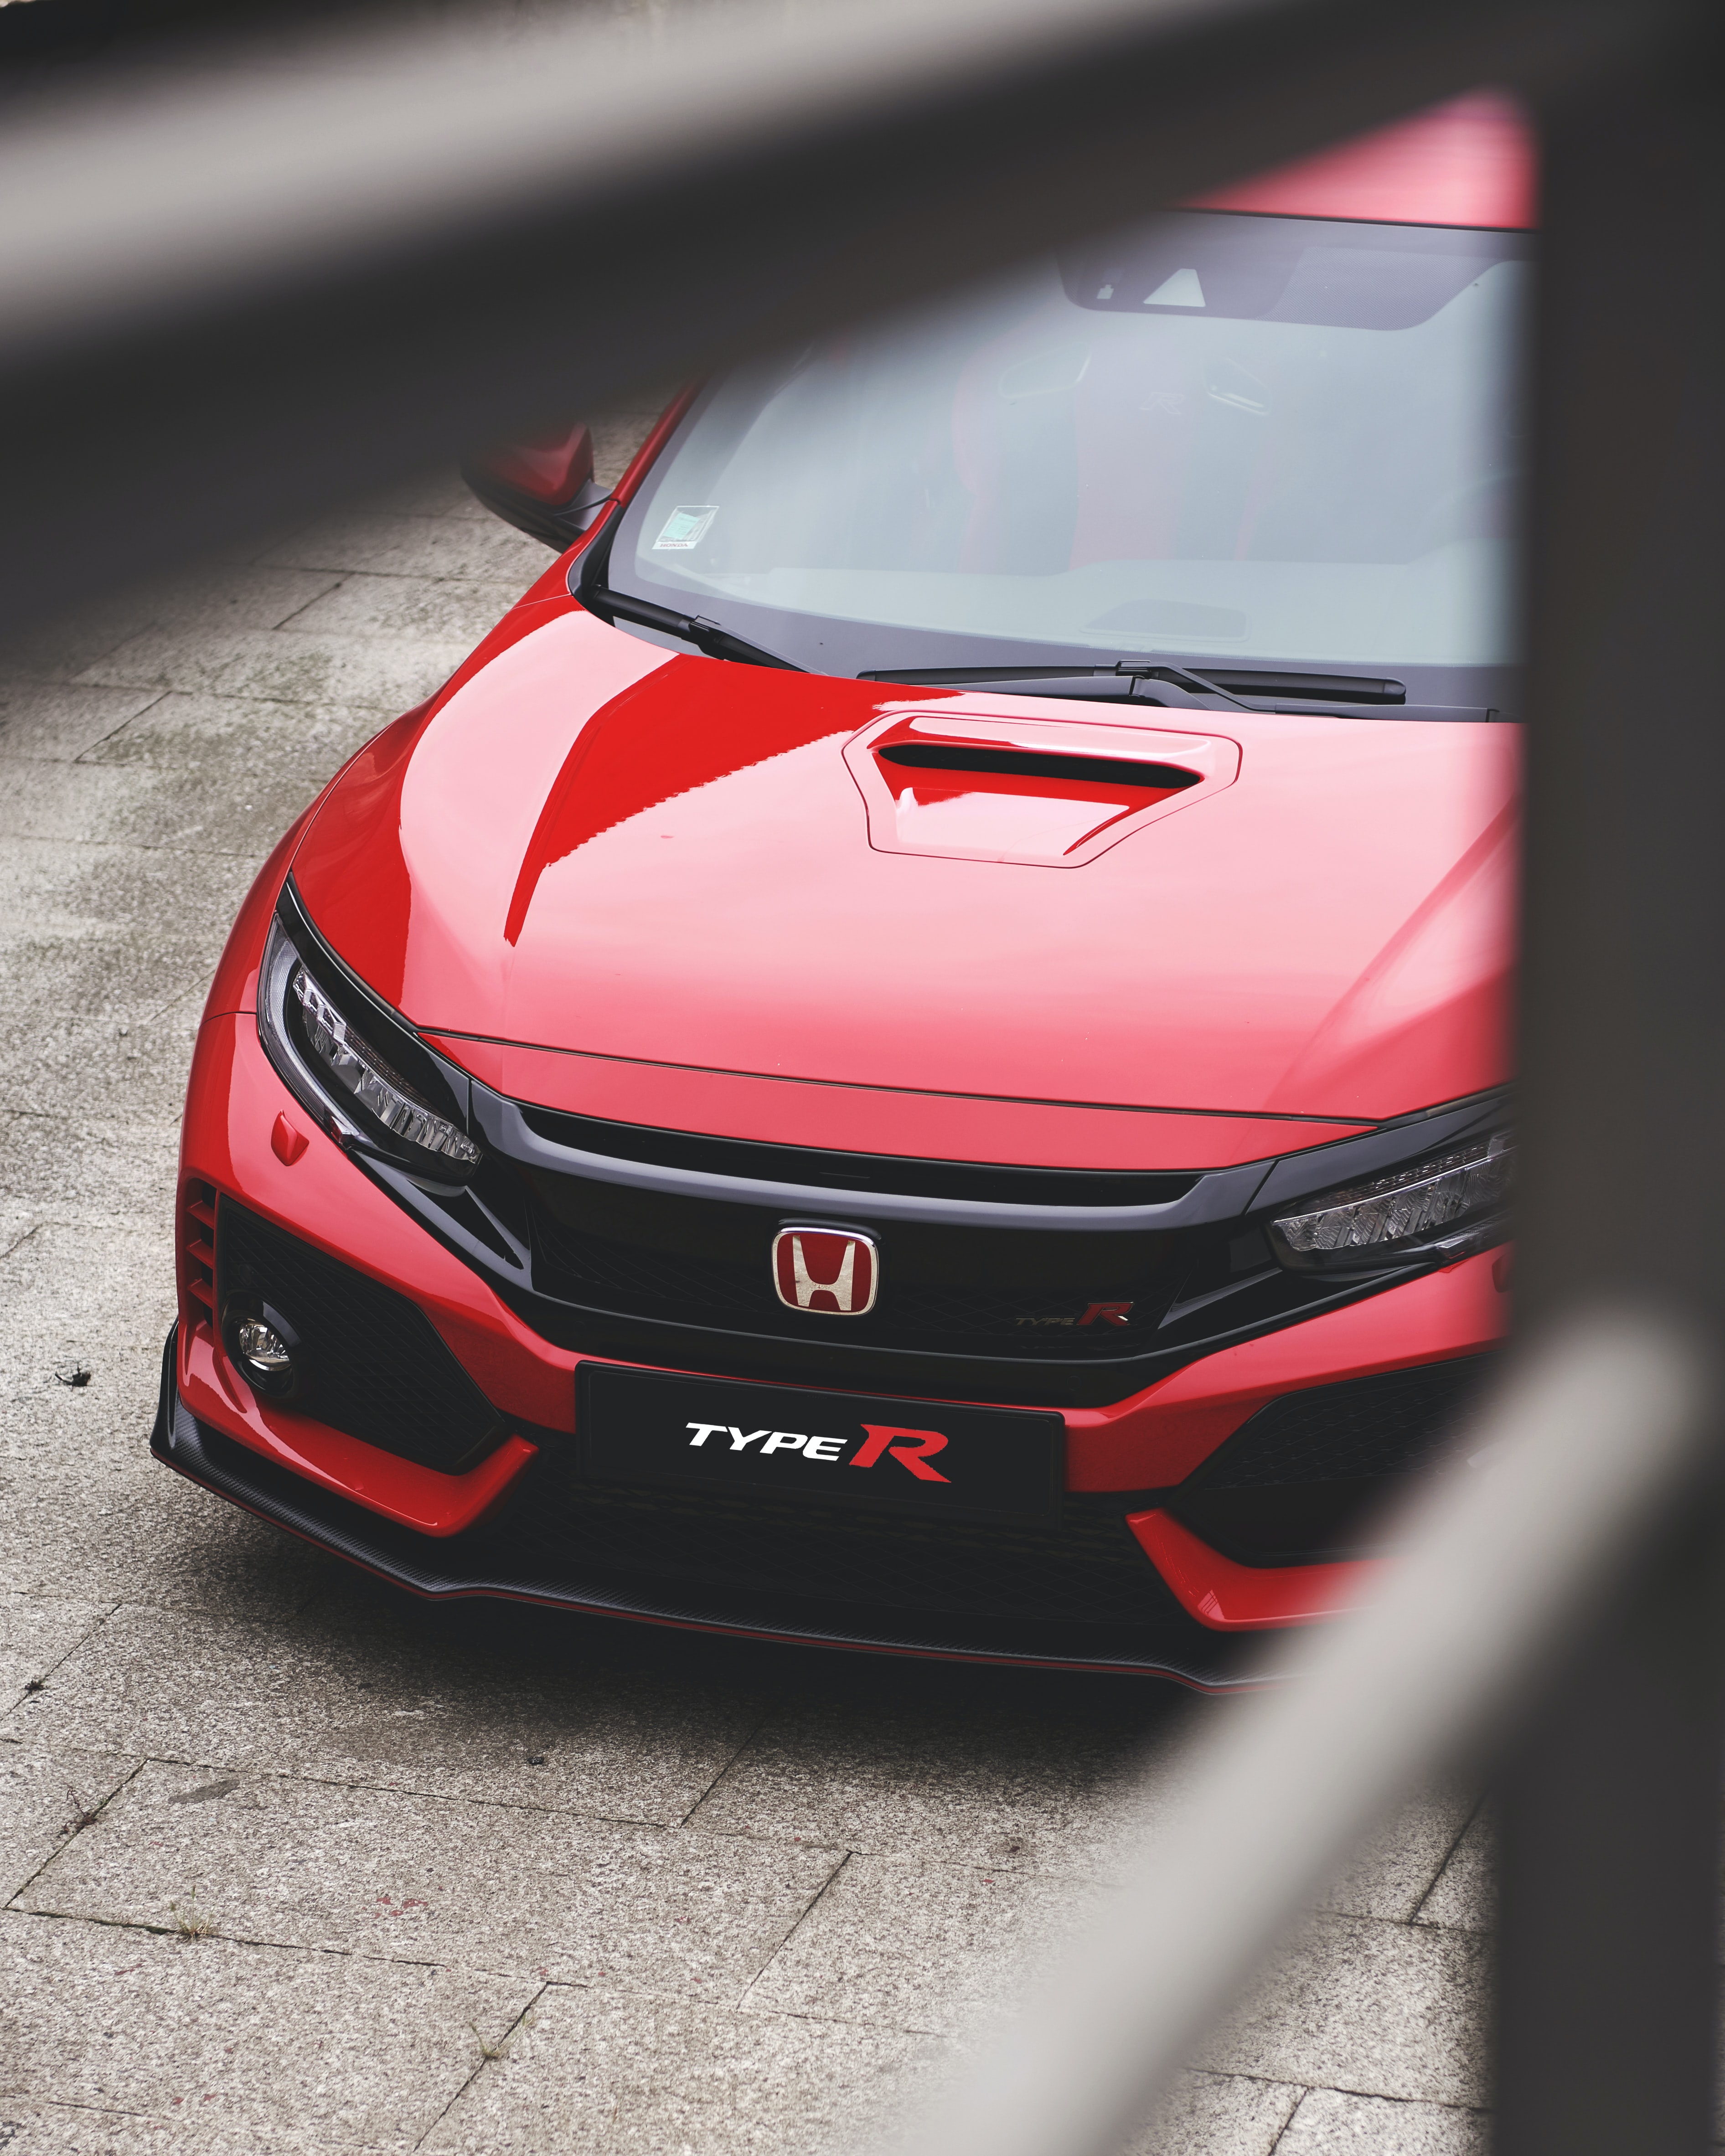 2023 Honda Civic Type R Will Have 326 HP: Report